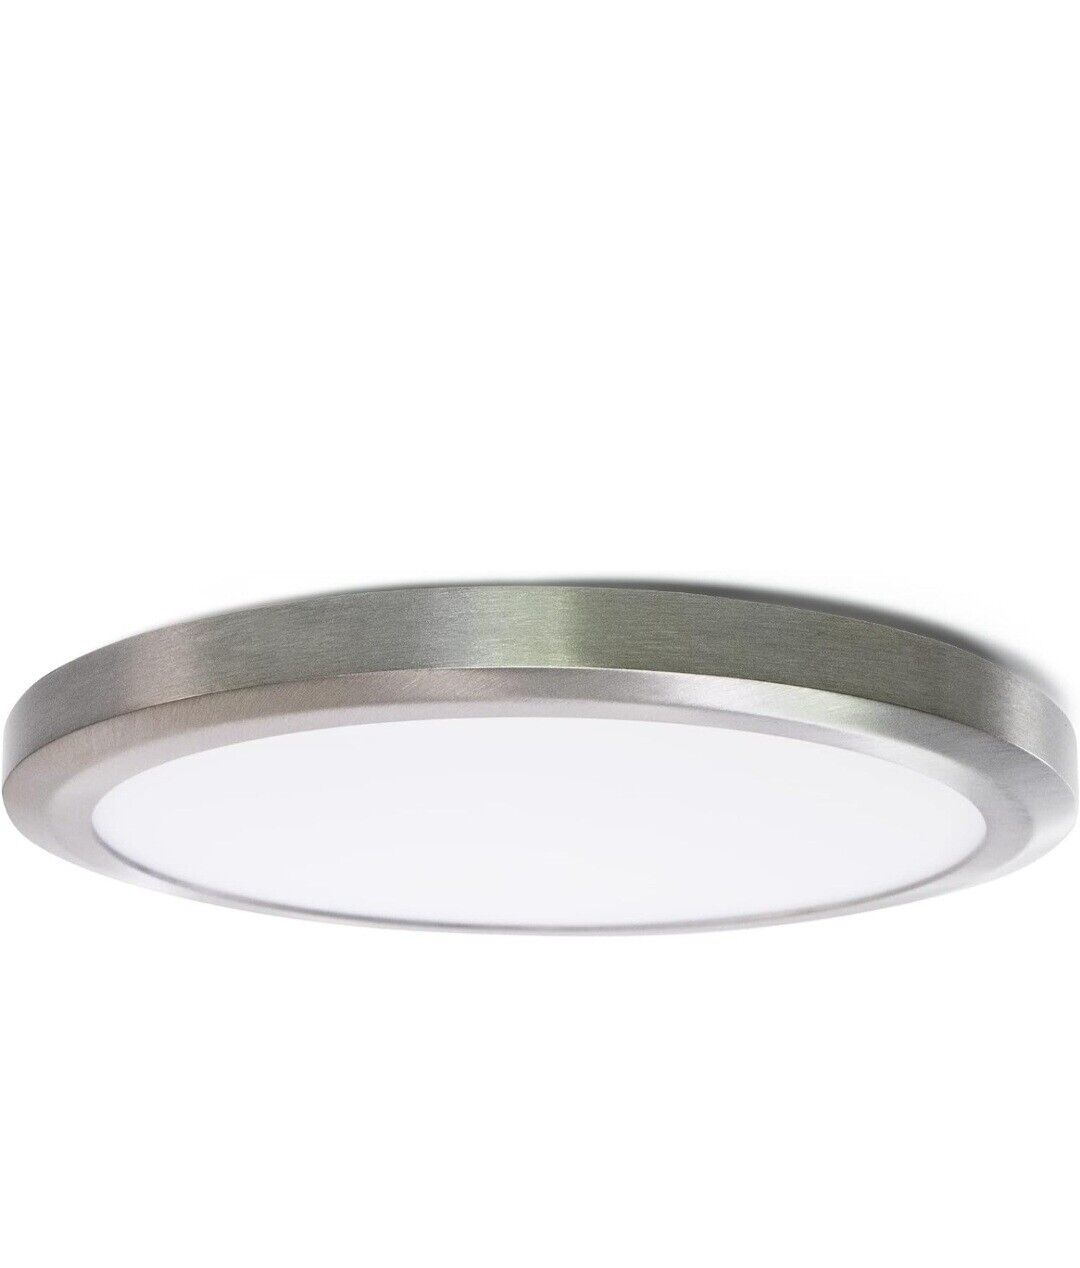 15 Inch-LED Decorative Ceiling Light Fixture, Color Temperature Selection Switch